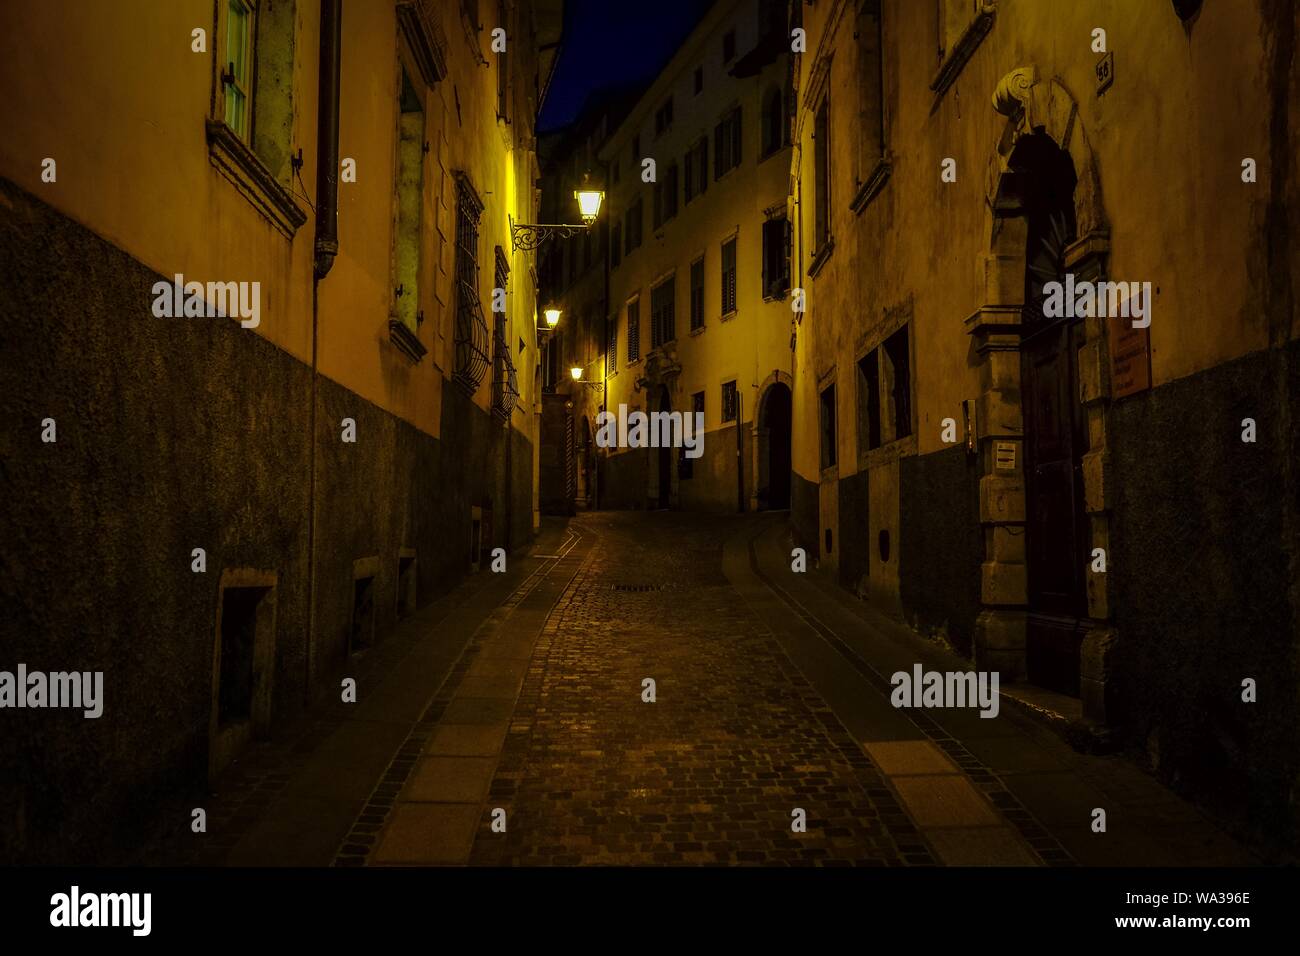 Alleyway In The Middle Of Buildings With Lit Street Lights At Night Time Stock Photo Alamy